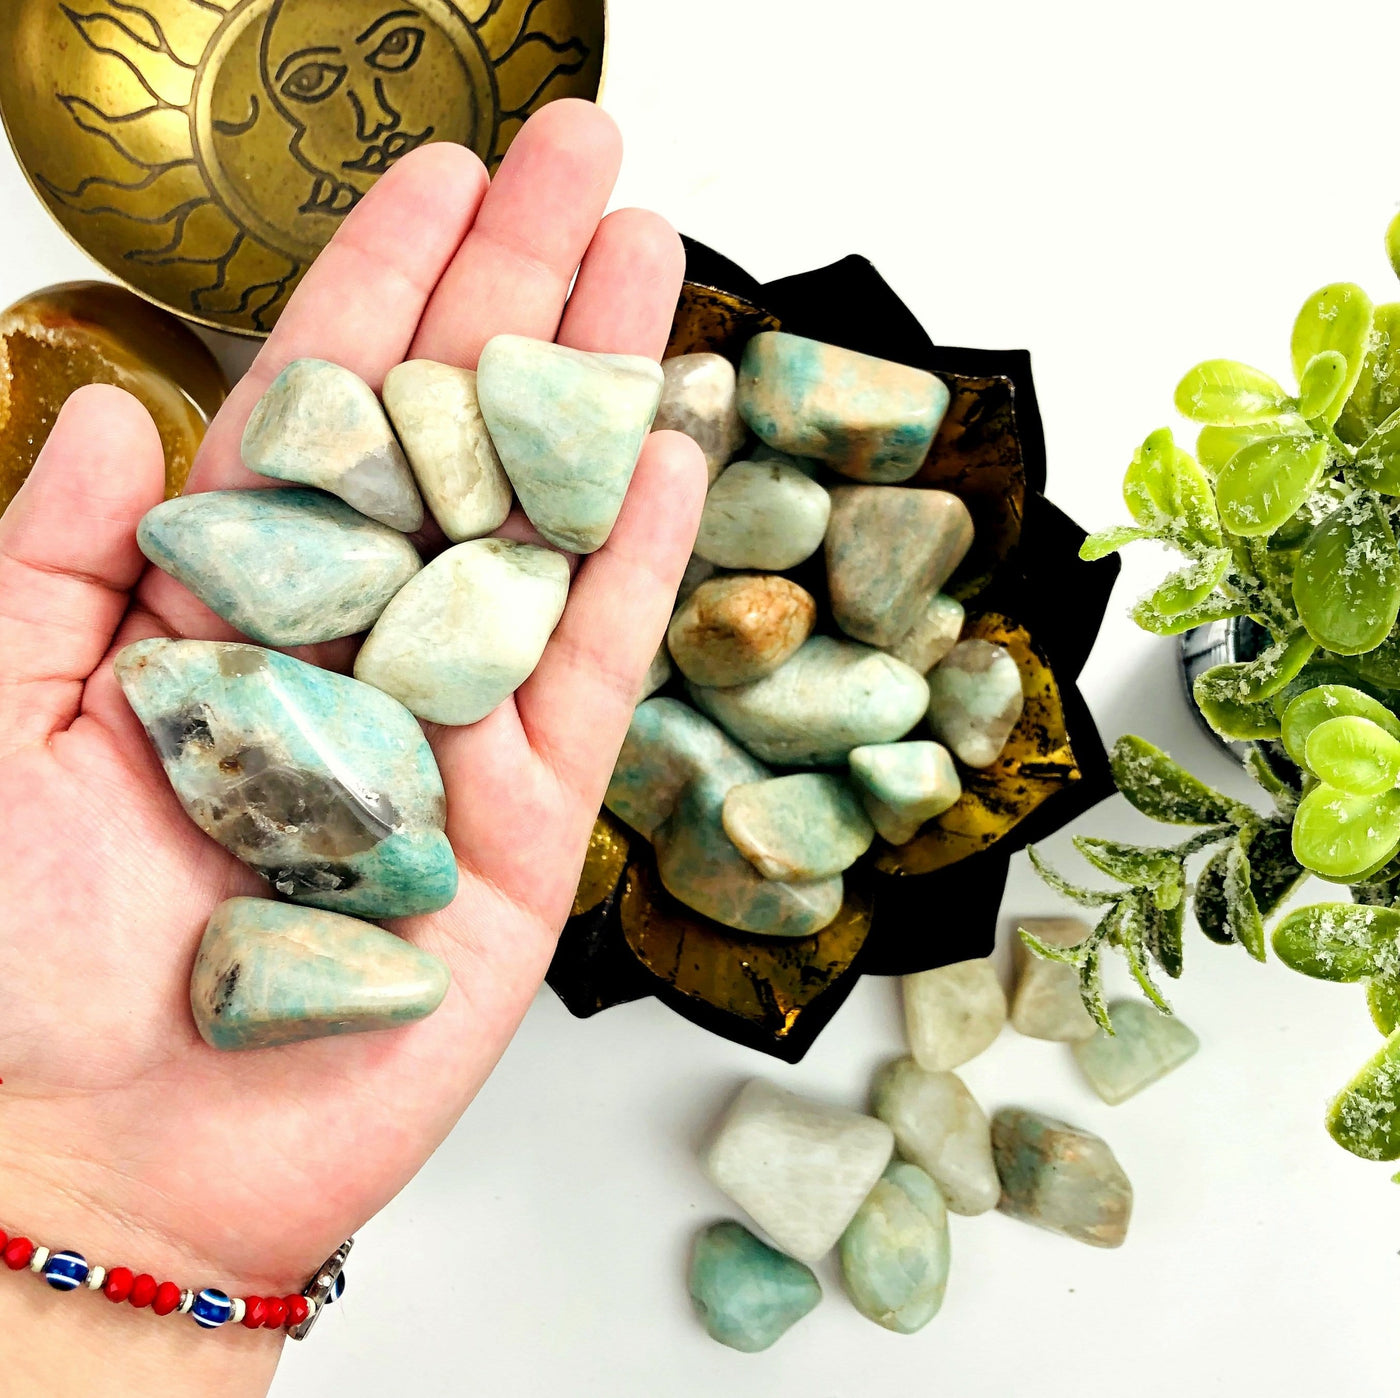 amazonite tumbled stones being held for size reference.